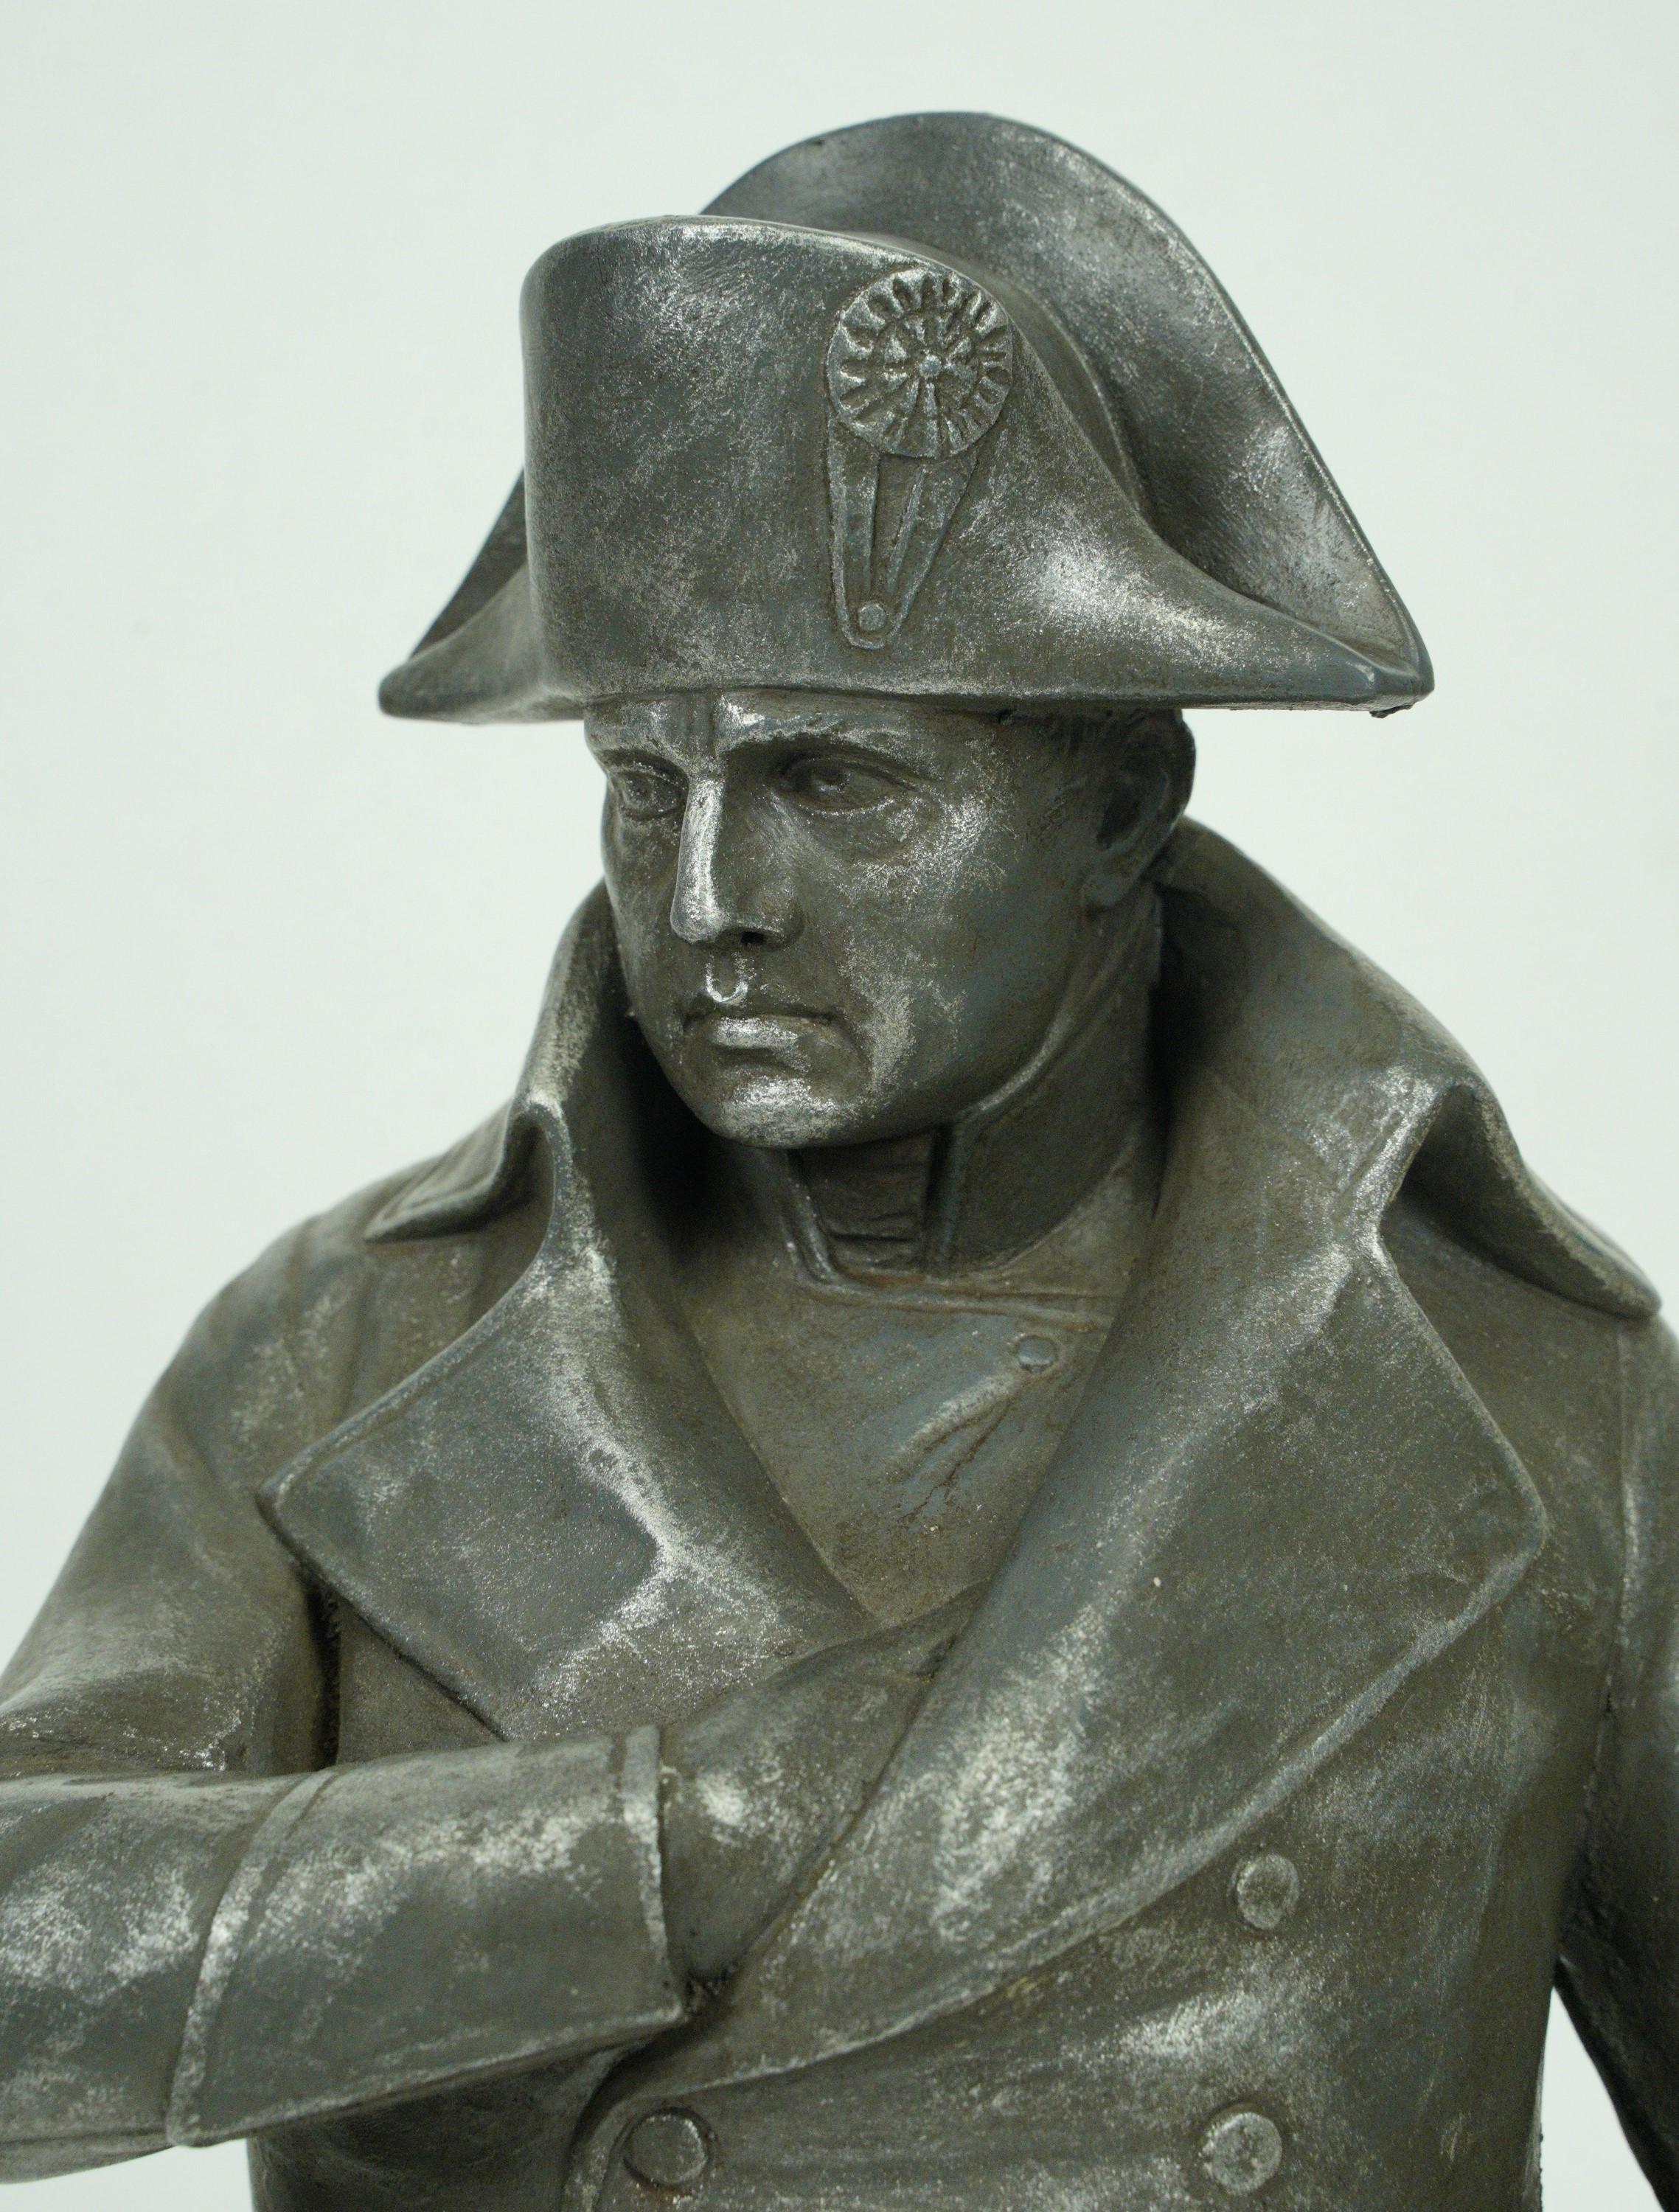 Figural statue of Napoleon Bonaparte made of solid aluminum. Good condition with appropriate wear from age. One available. Please note, this item is located in one of our NYC locations.